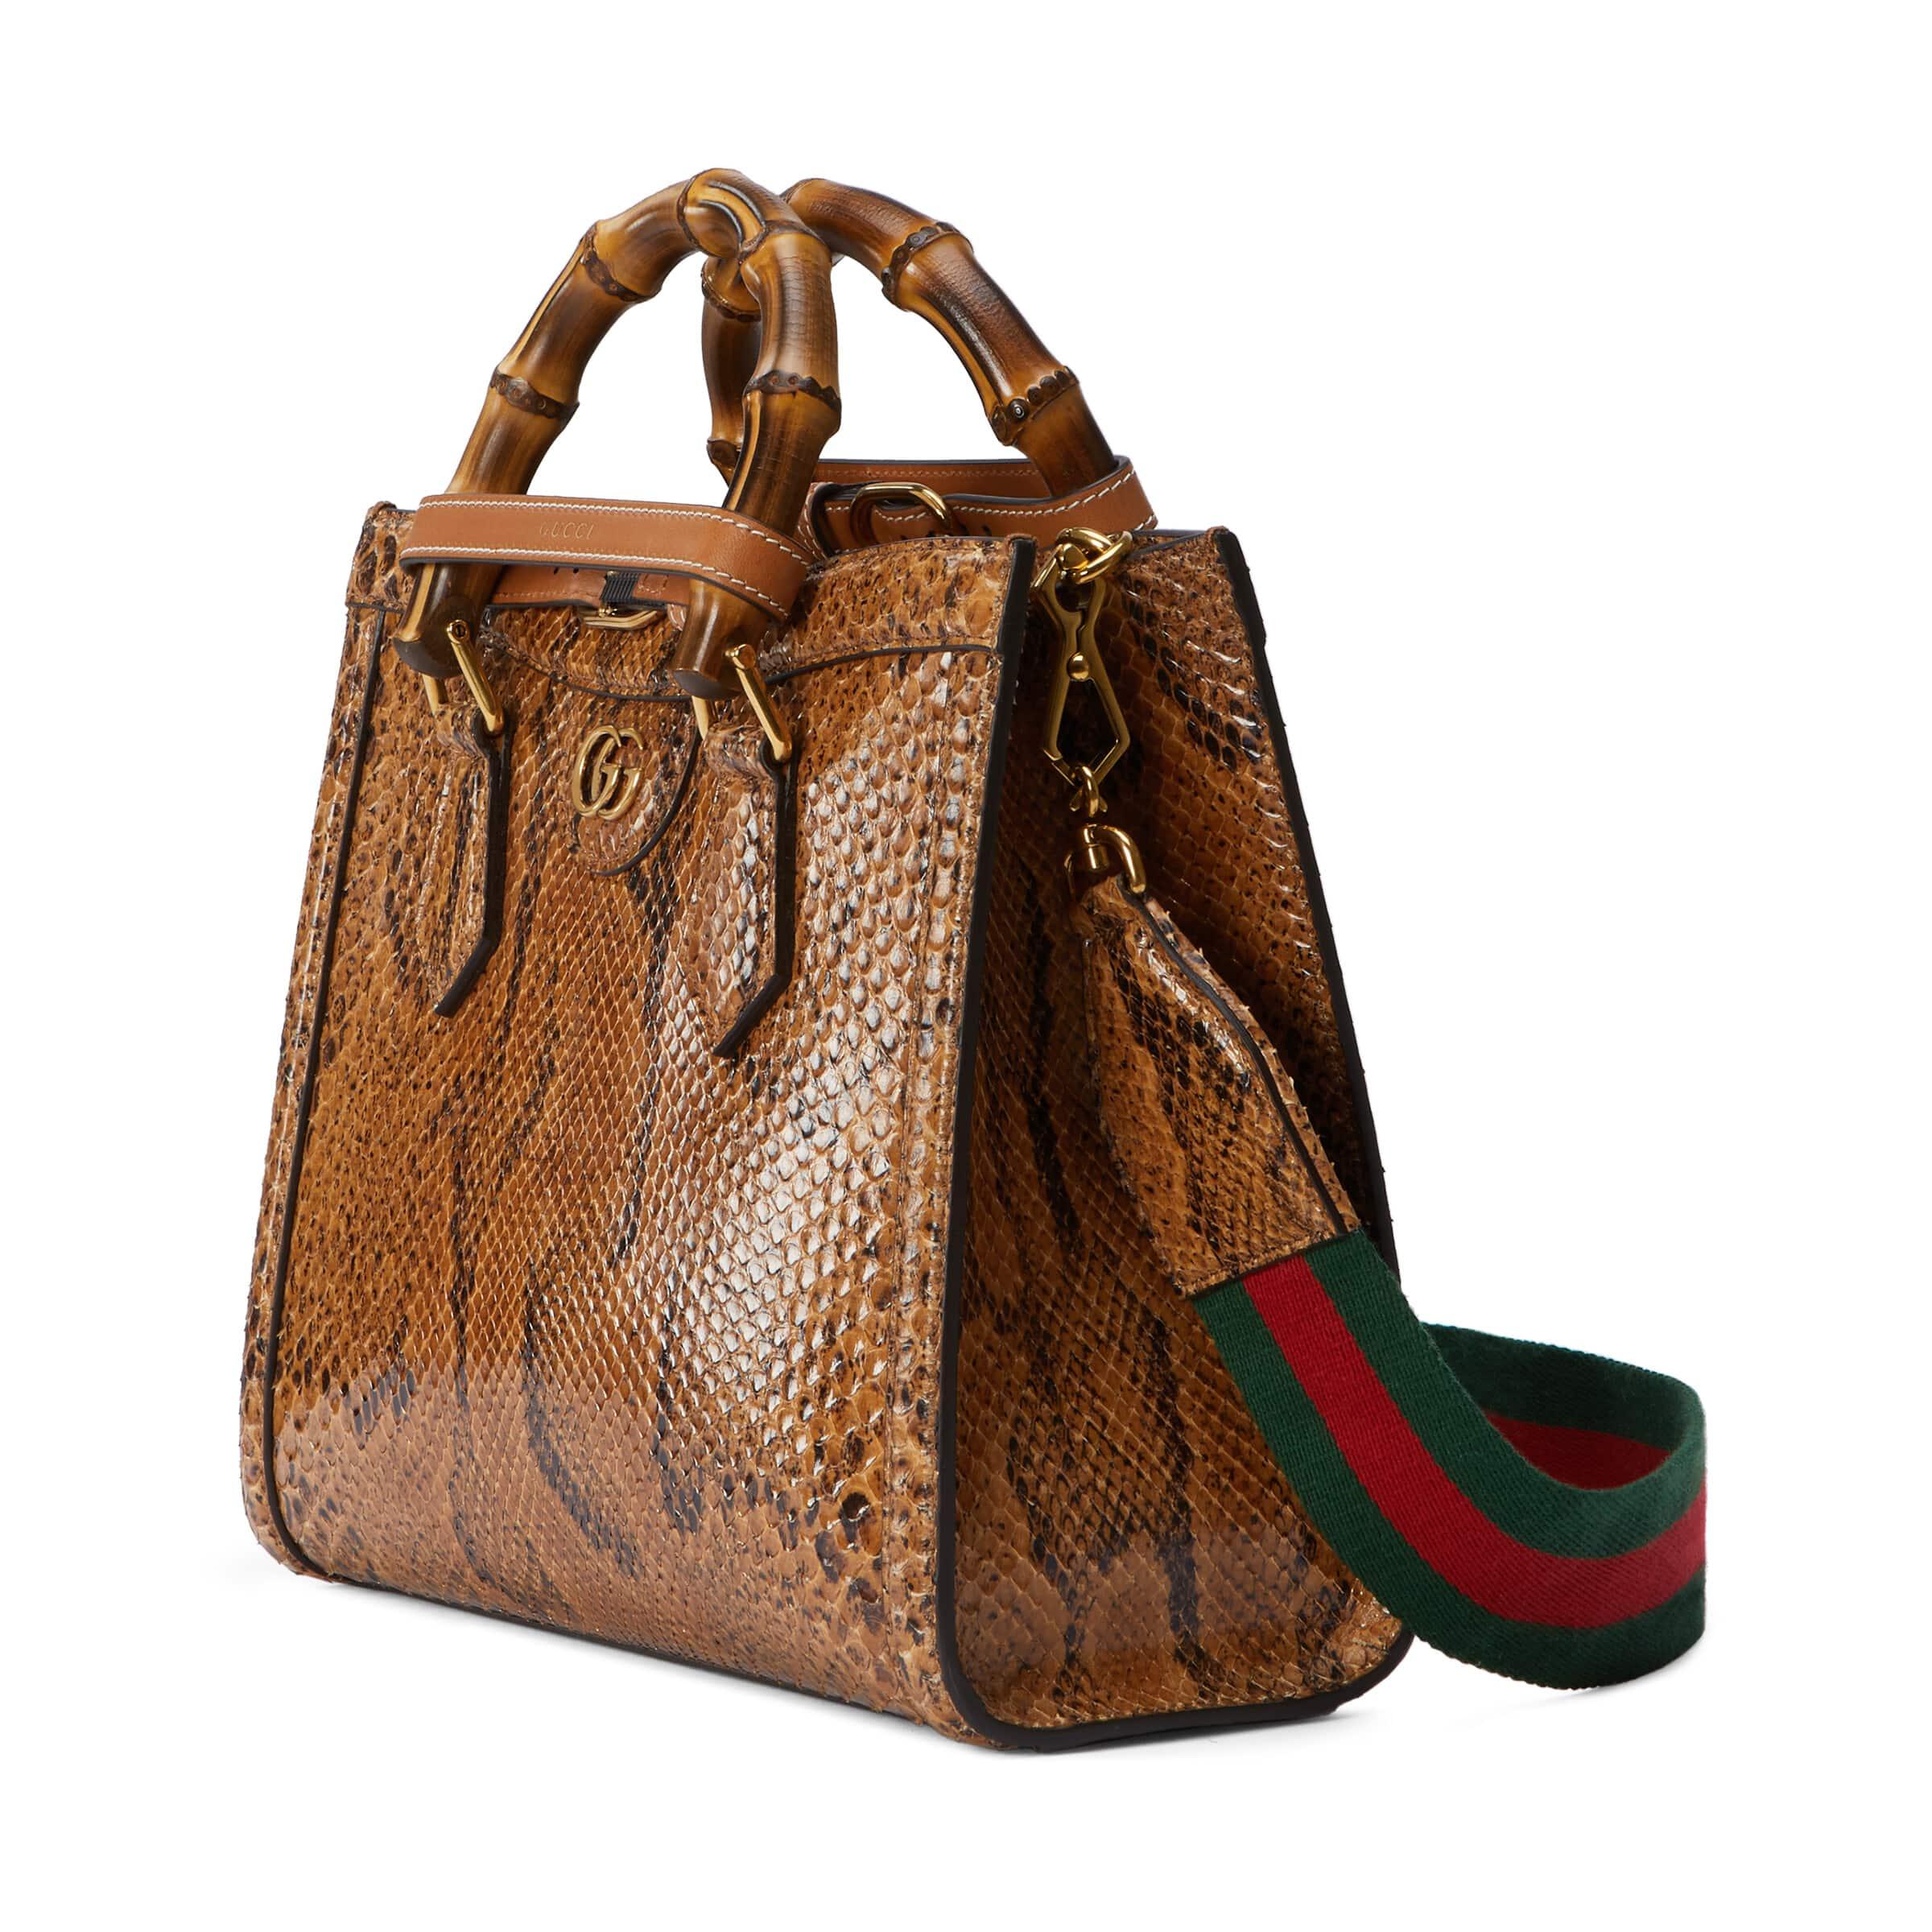 Gucci Diana Small Python Bag in Brown | Lyst